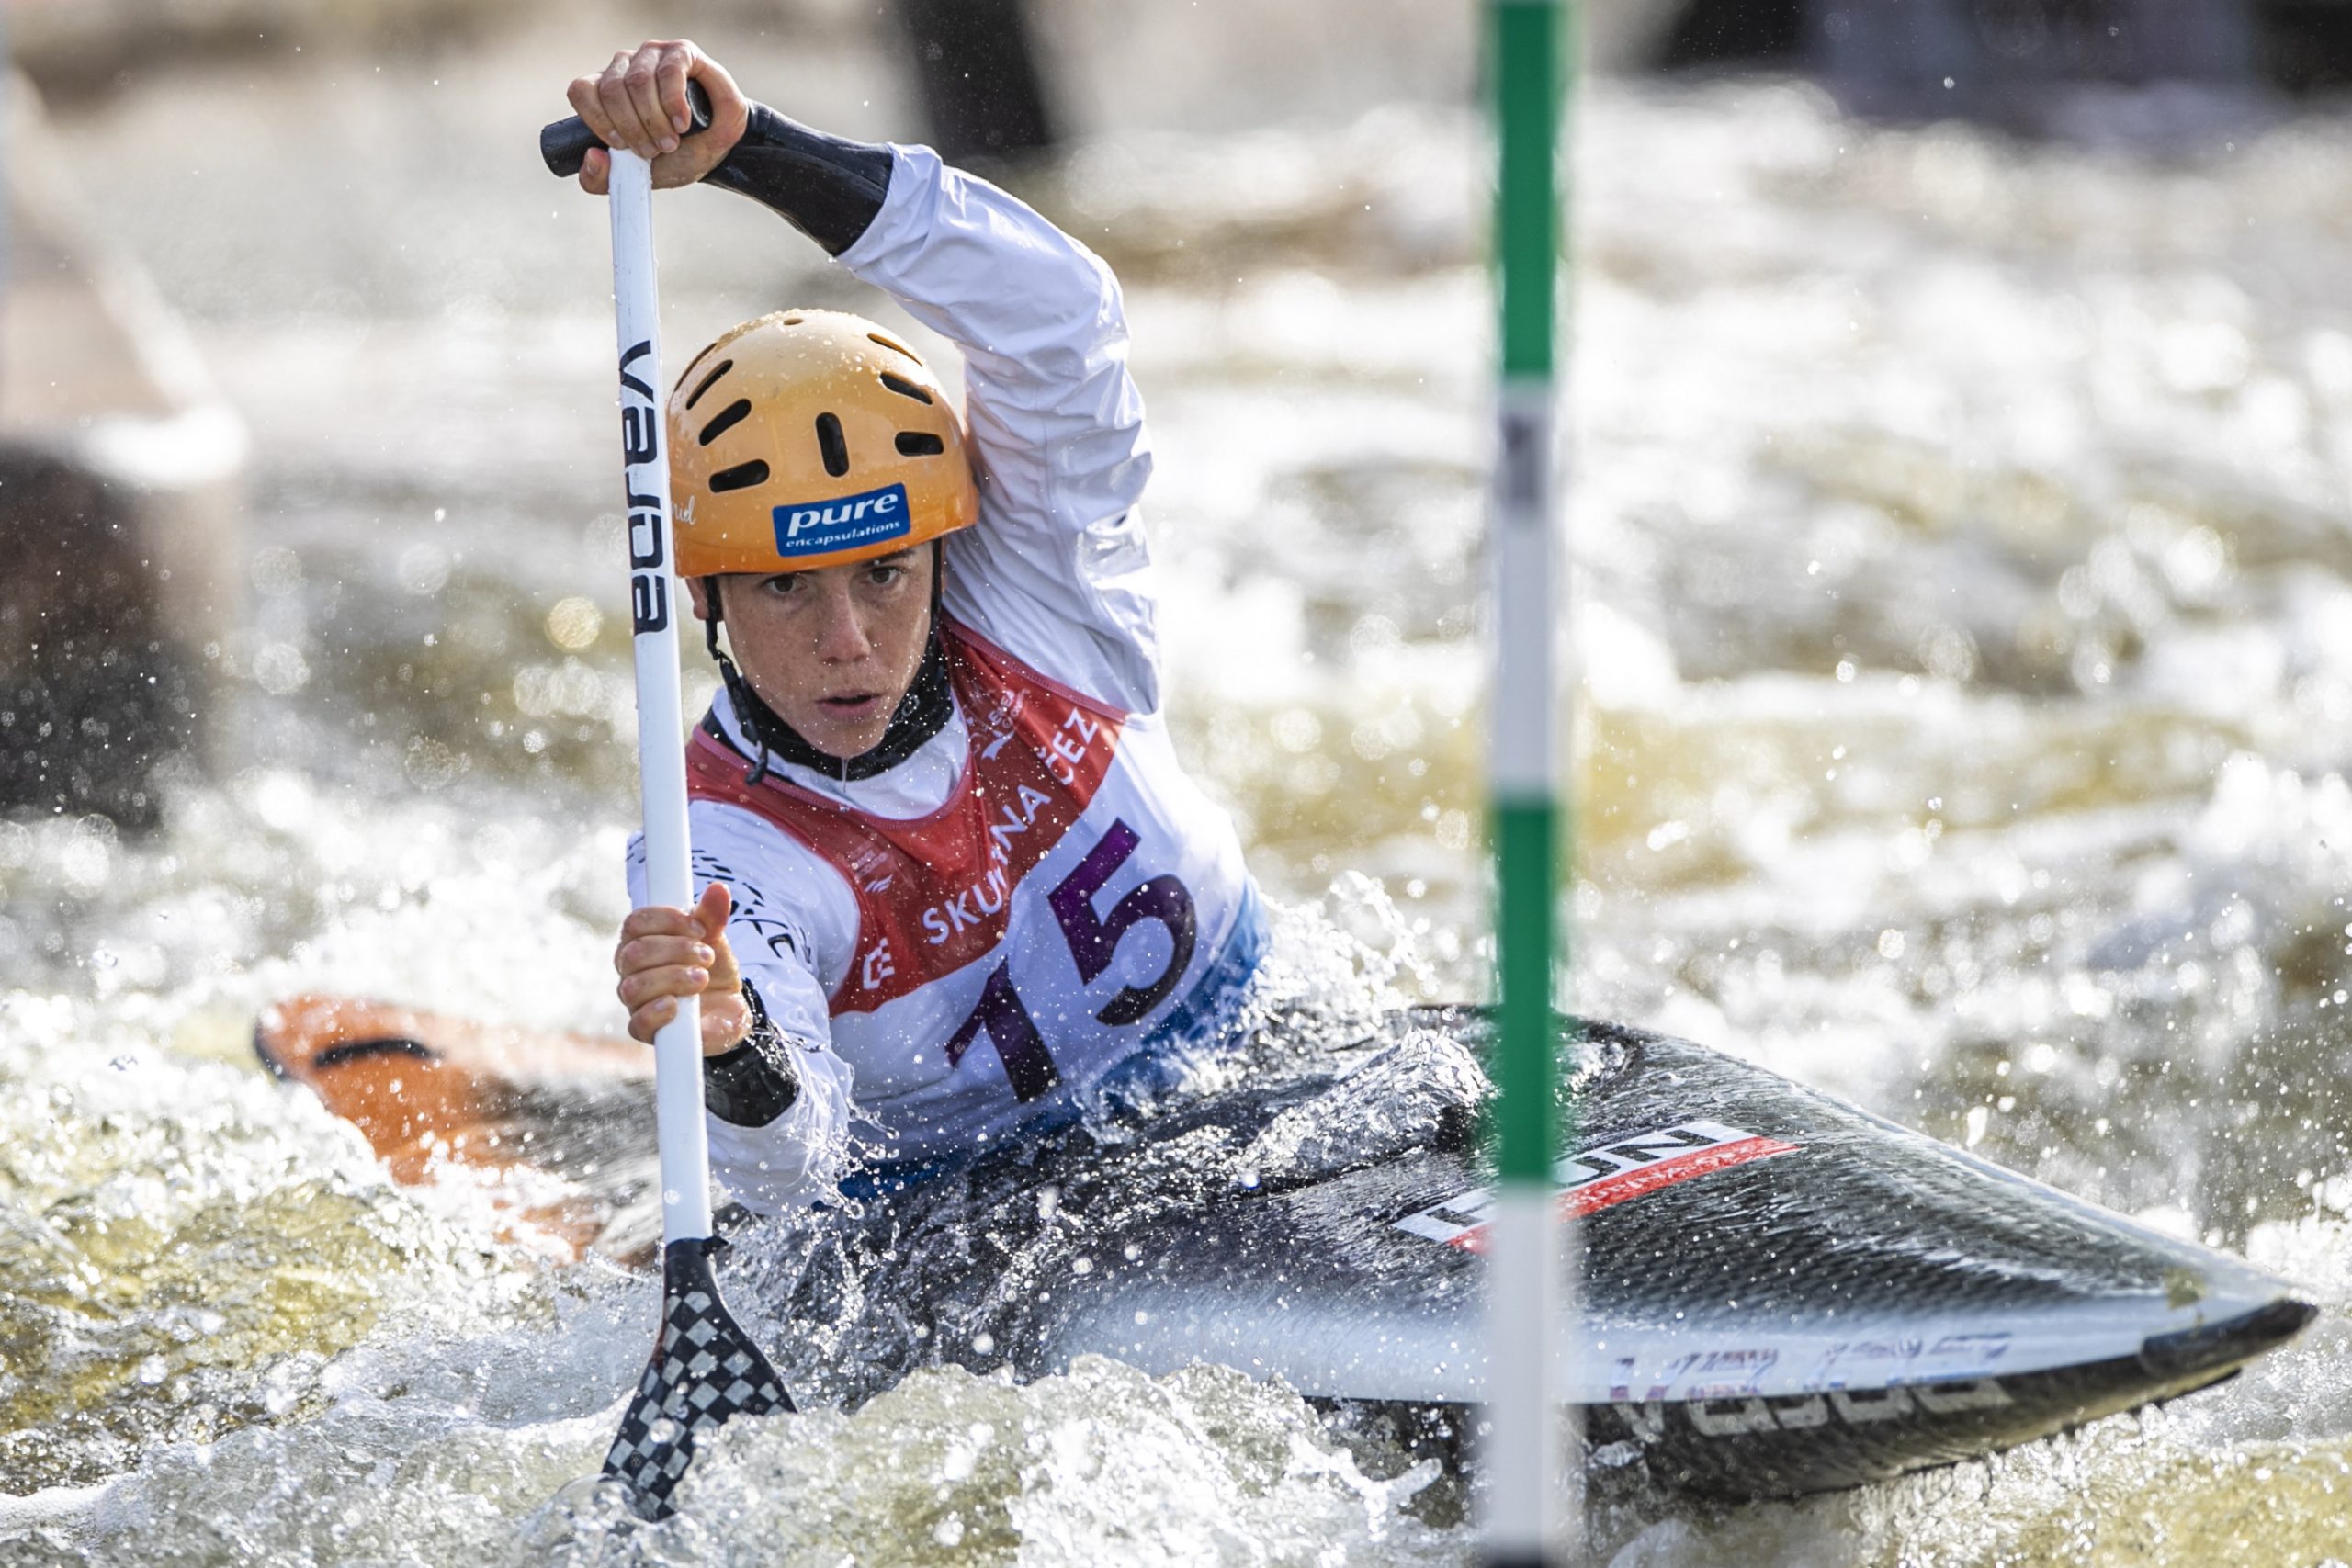 Hungary's First Kayak Slalom Olympian Withdraws from Games After Obligatory Vaccination